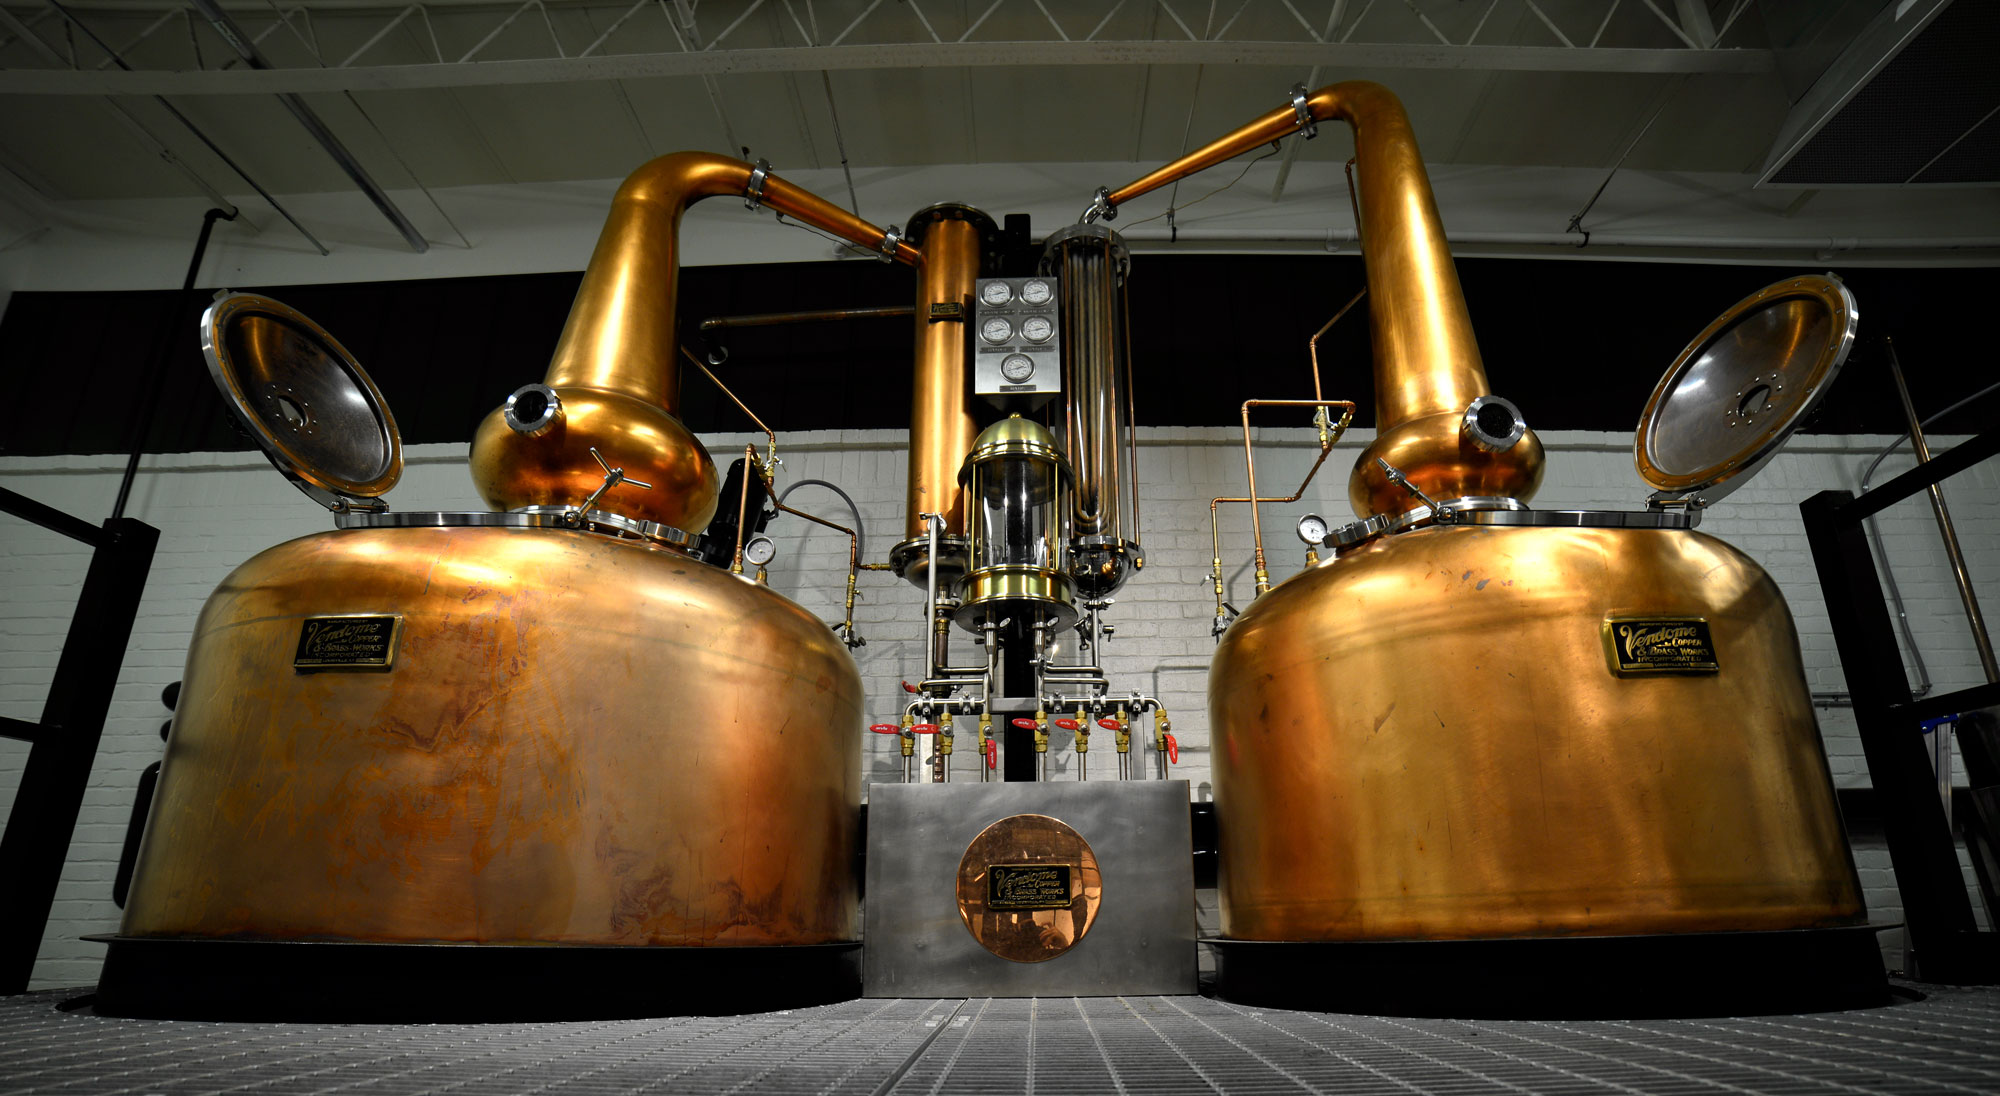 Photograph of two large copper stills at a bourbon distillery in Atlanta, Georgia, USA.